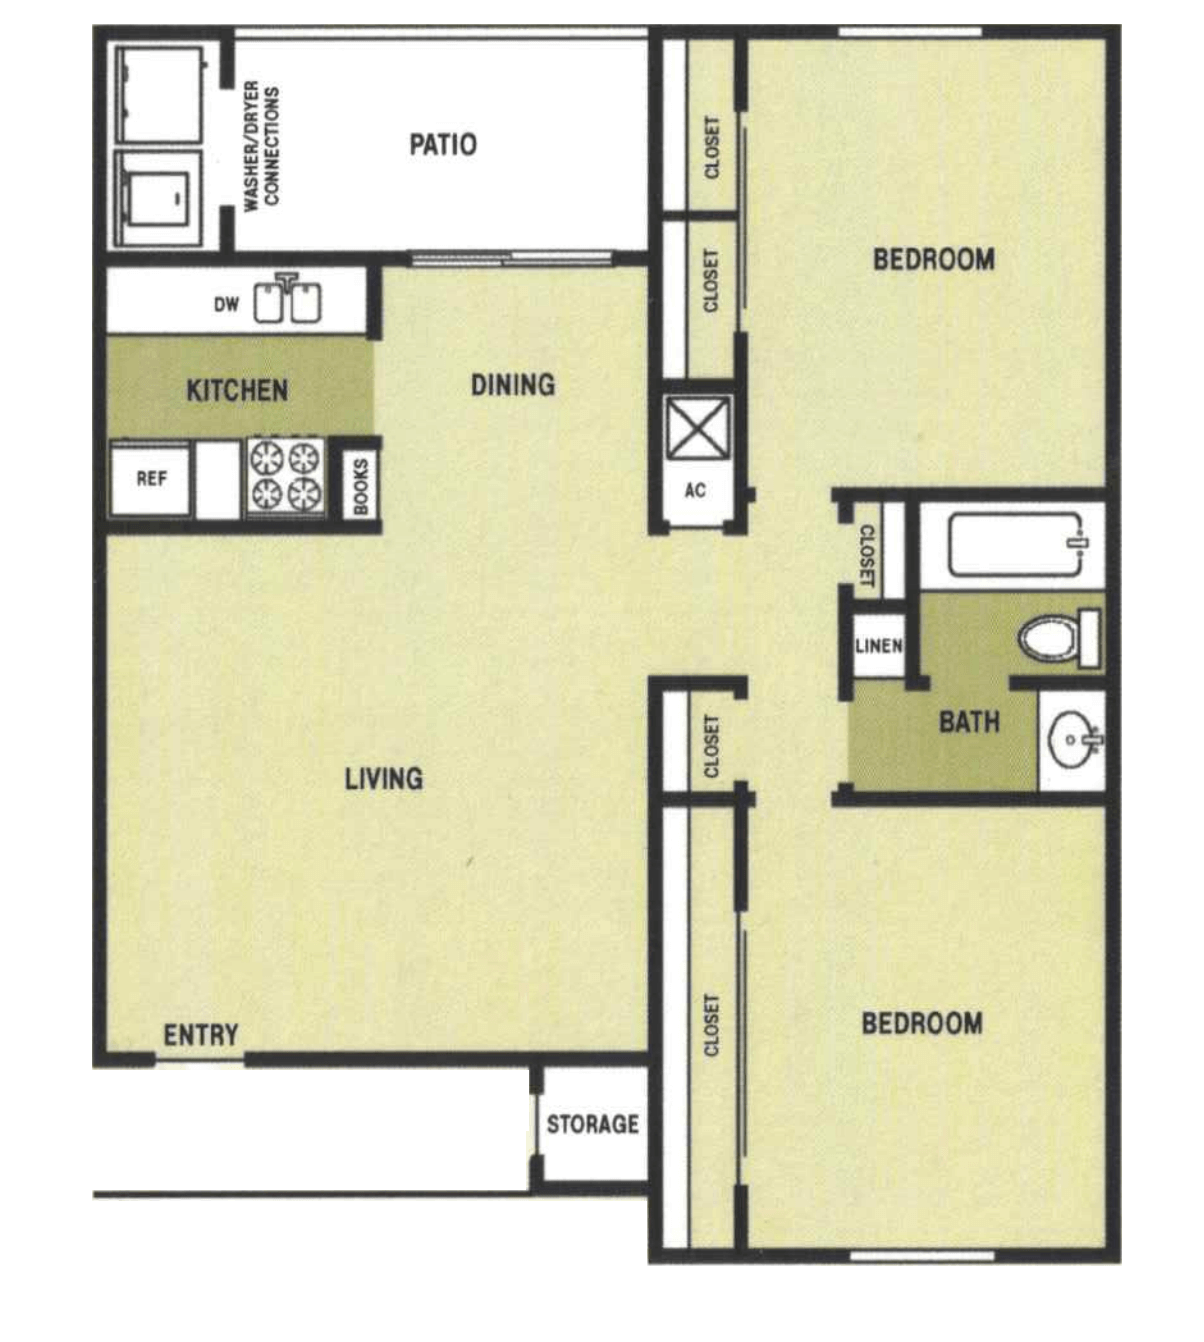 A 2×1 unit with 2 Bedrooms and 1 Bathrooms with area of 925 sq. ft